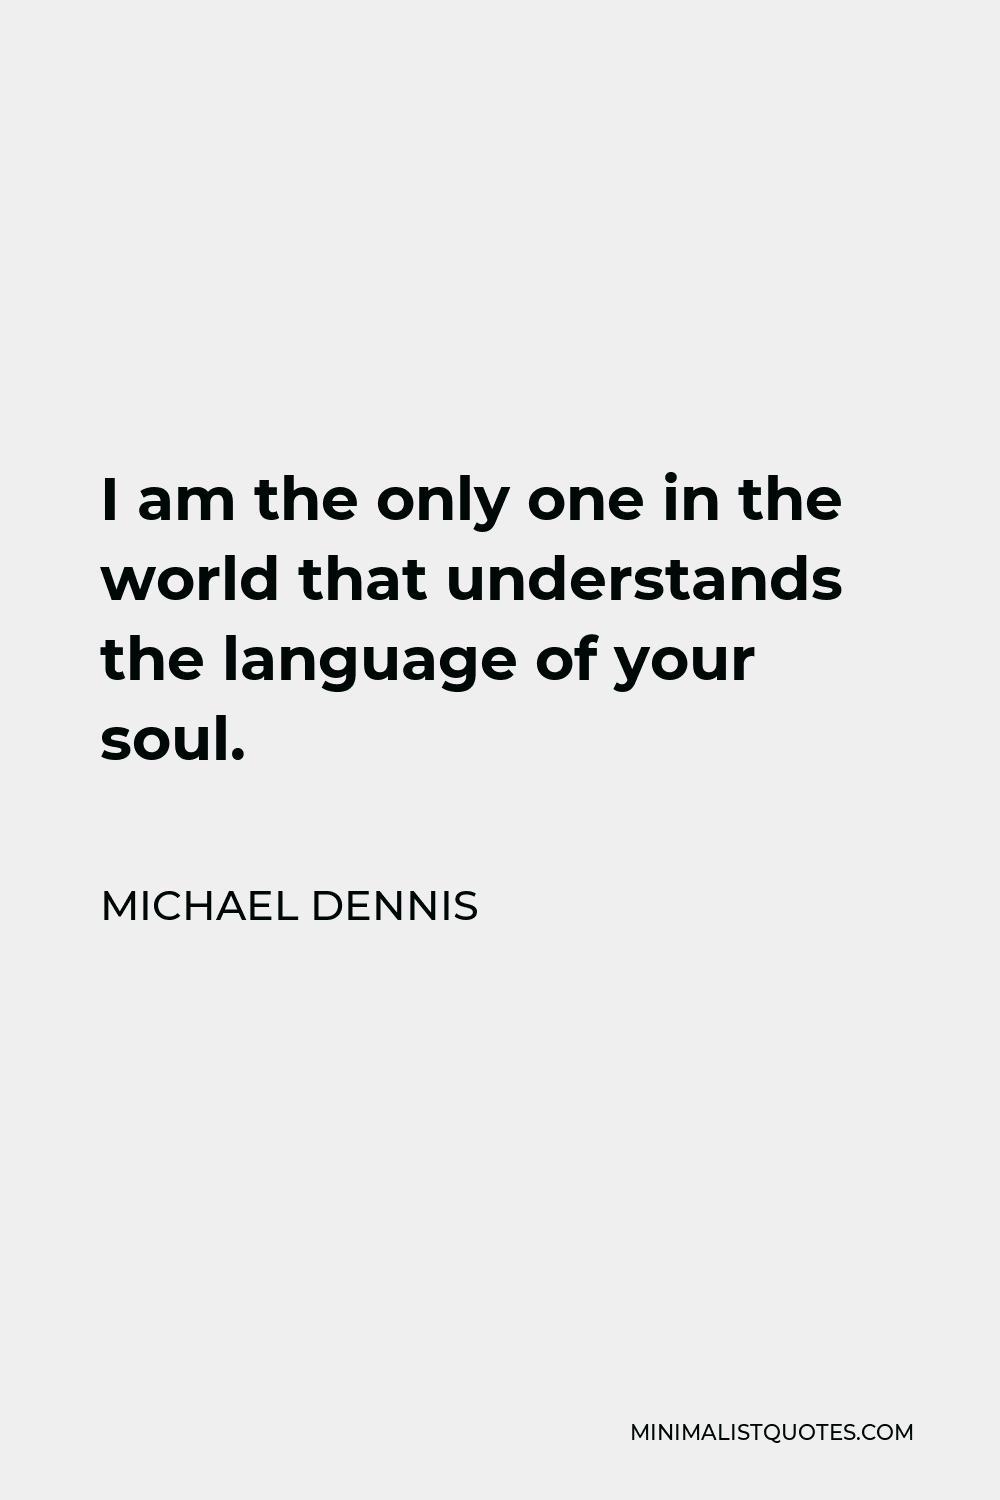 Michael Dennis Quote - I am the only one in the world that understands the language of your soul.